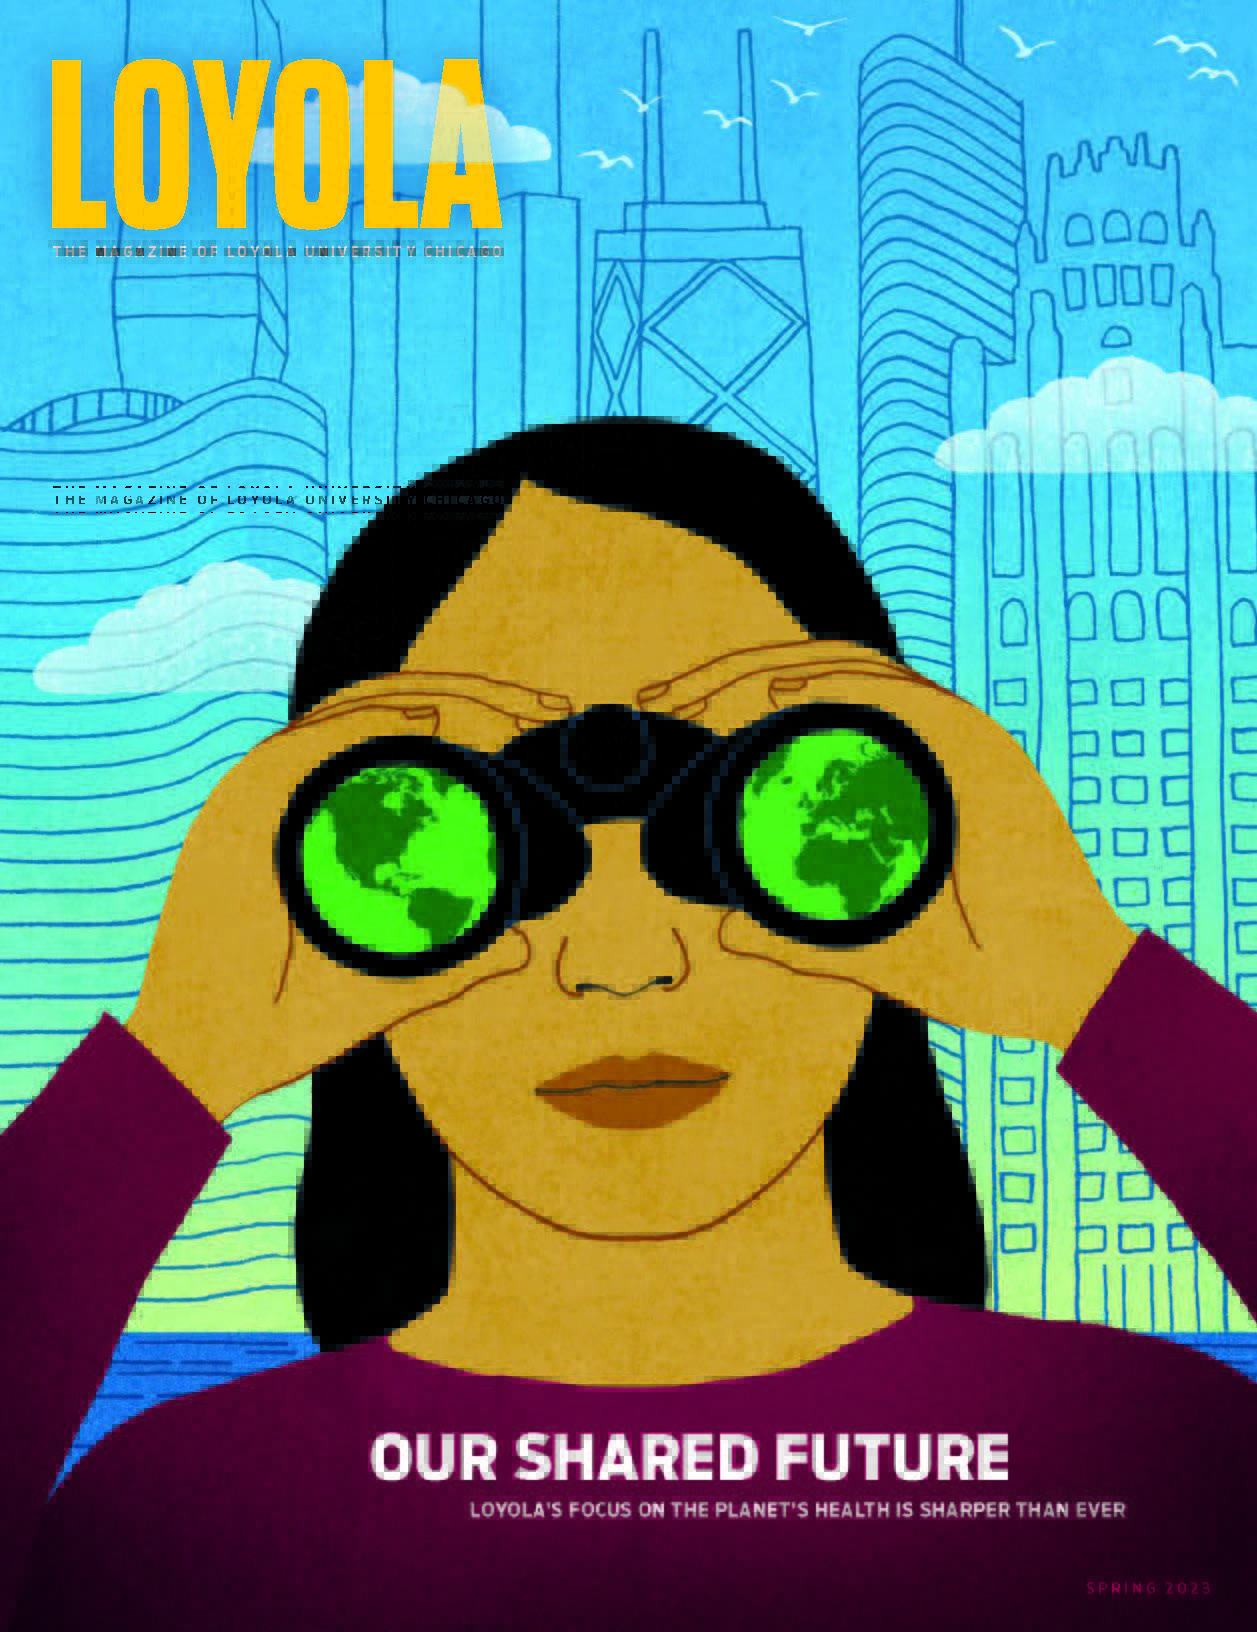 The spring 2023 issue of Loyola magazine with an illustration of a woman holding binoculars with the planet Earth in each of the lenses and the Chicago skyline in the background with the text 